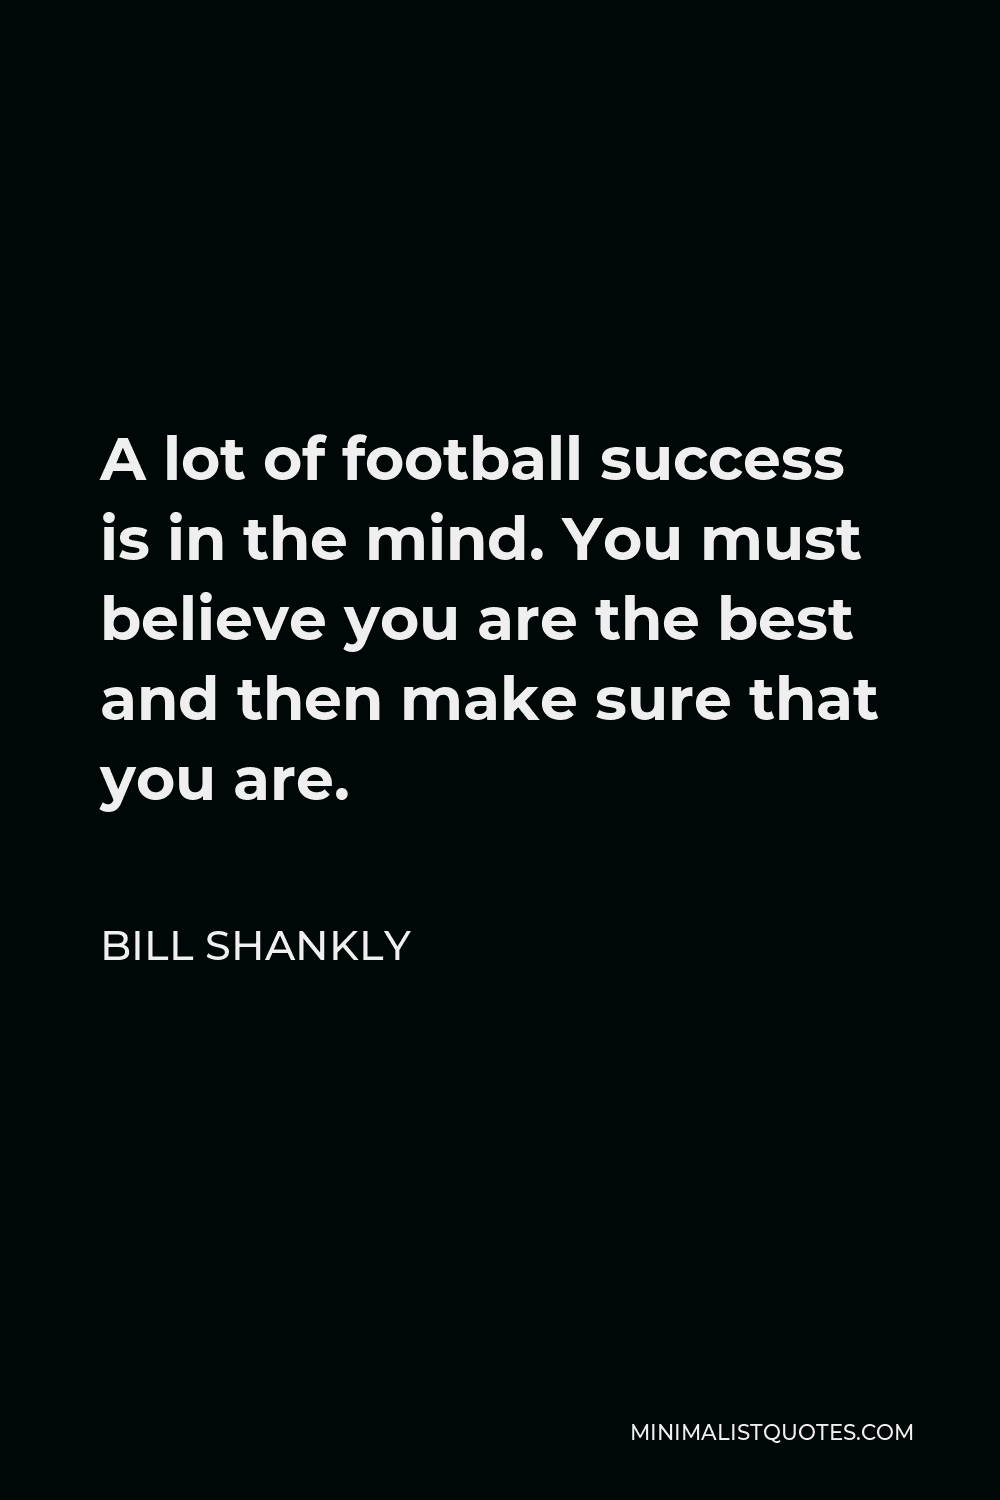 Bill Shankly Quote - A lot of football success is in the mind. You must believe you are the best and then make sure that you are.